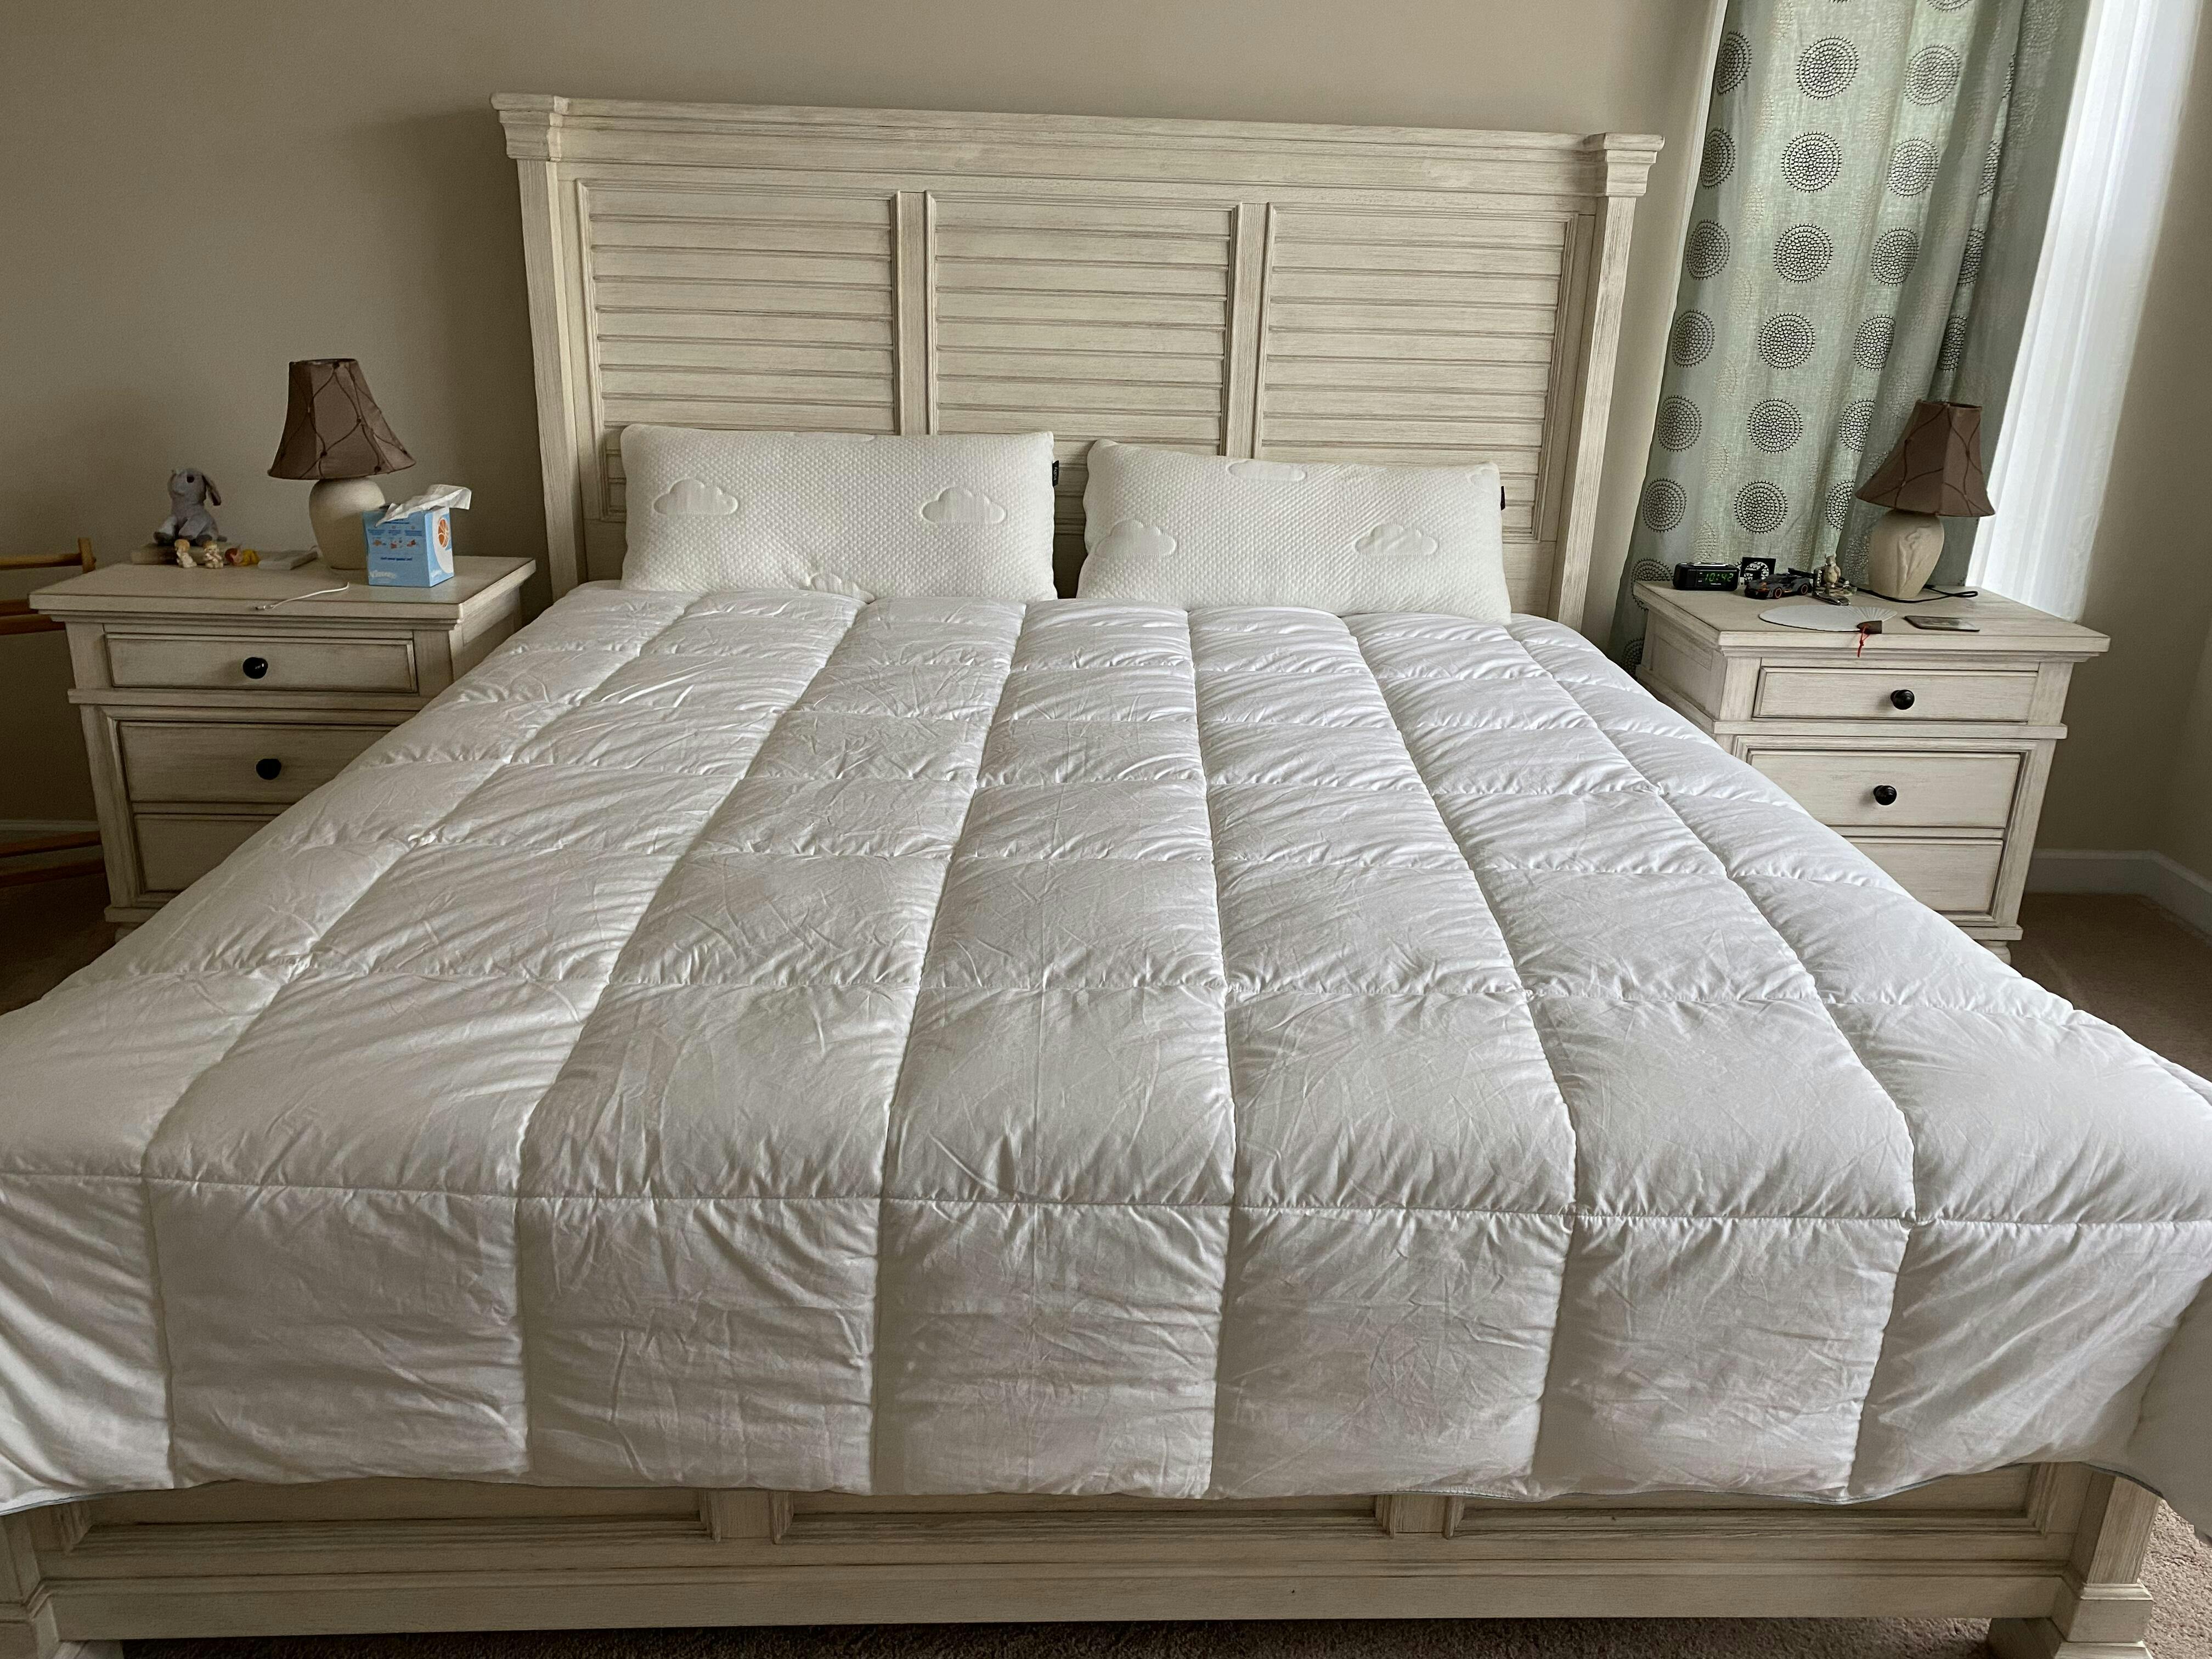 puffy mattress cover wash instructions